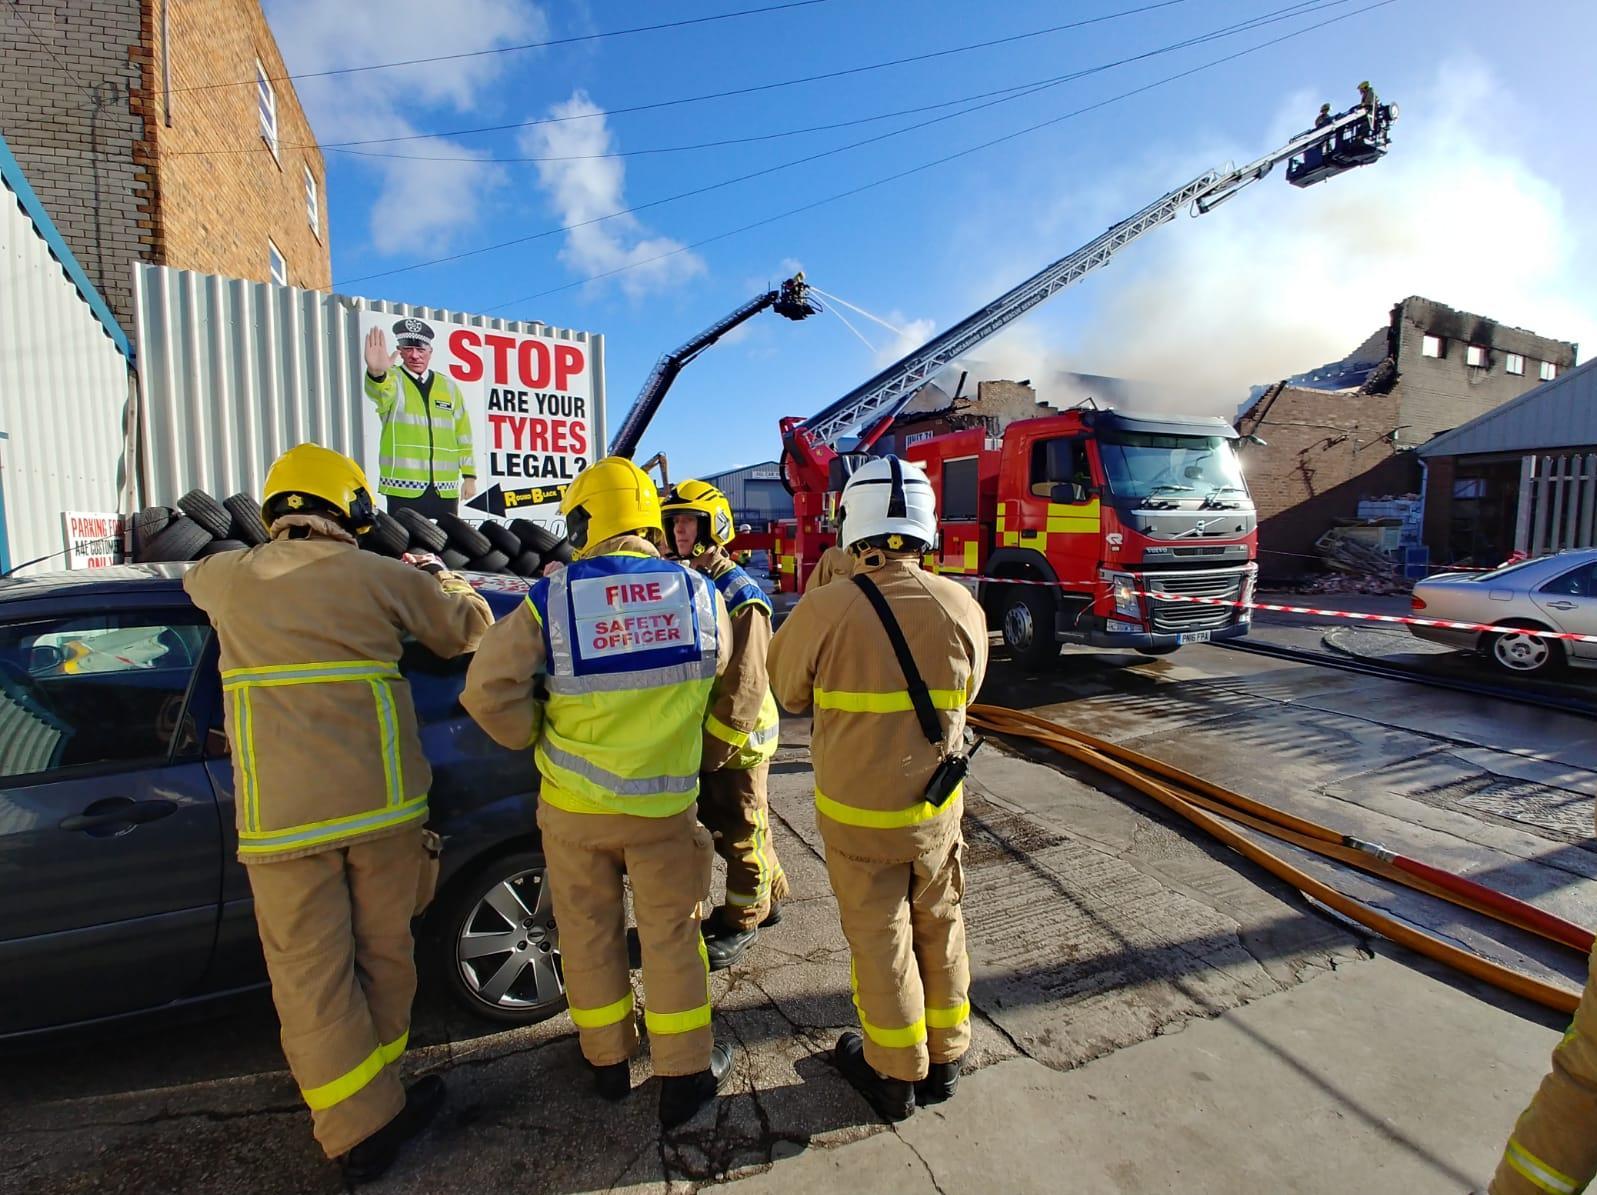 Latest pictures from the scene show the building has partially collapsed, confirming earlier fears fire crews would be unable to save it despite their best efforts